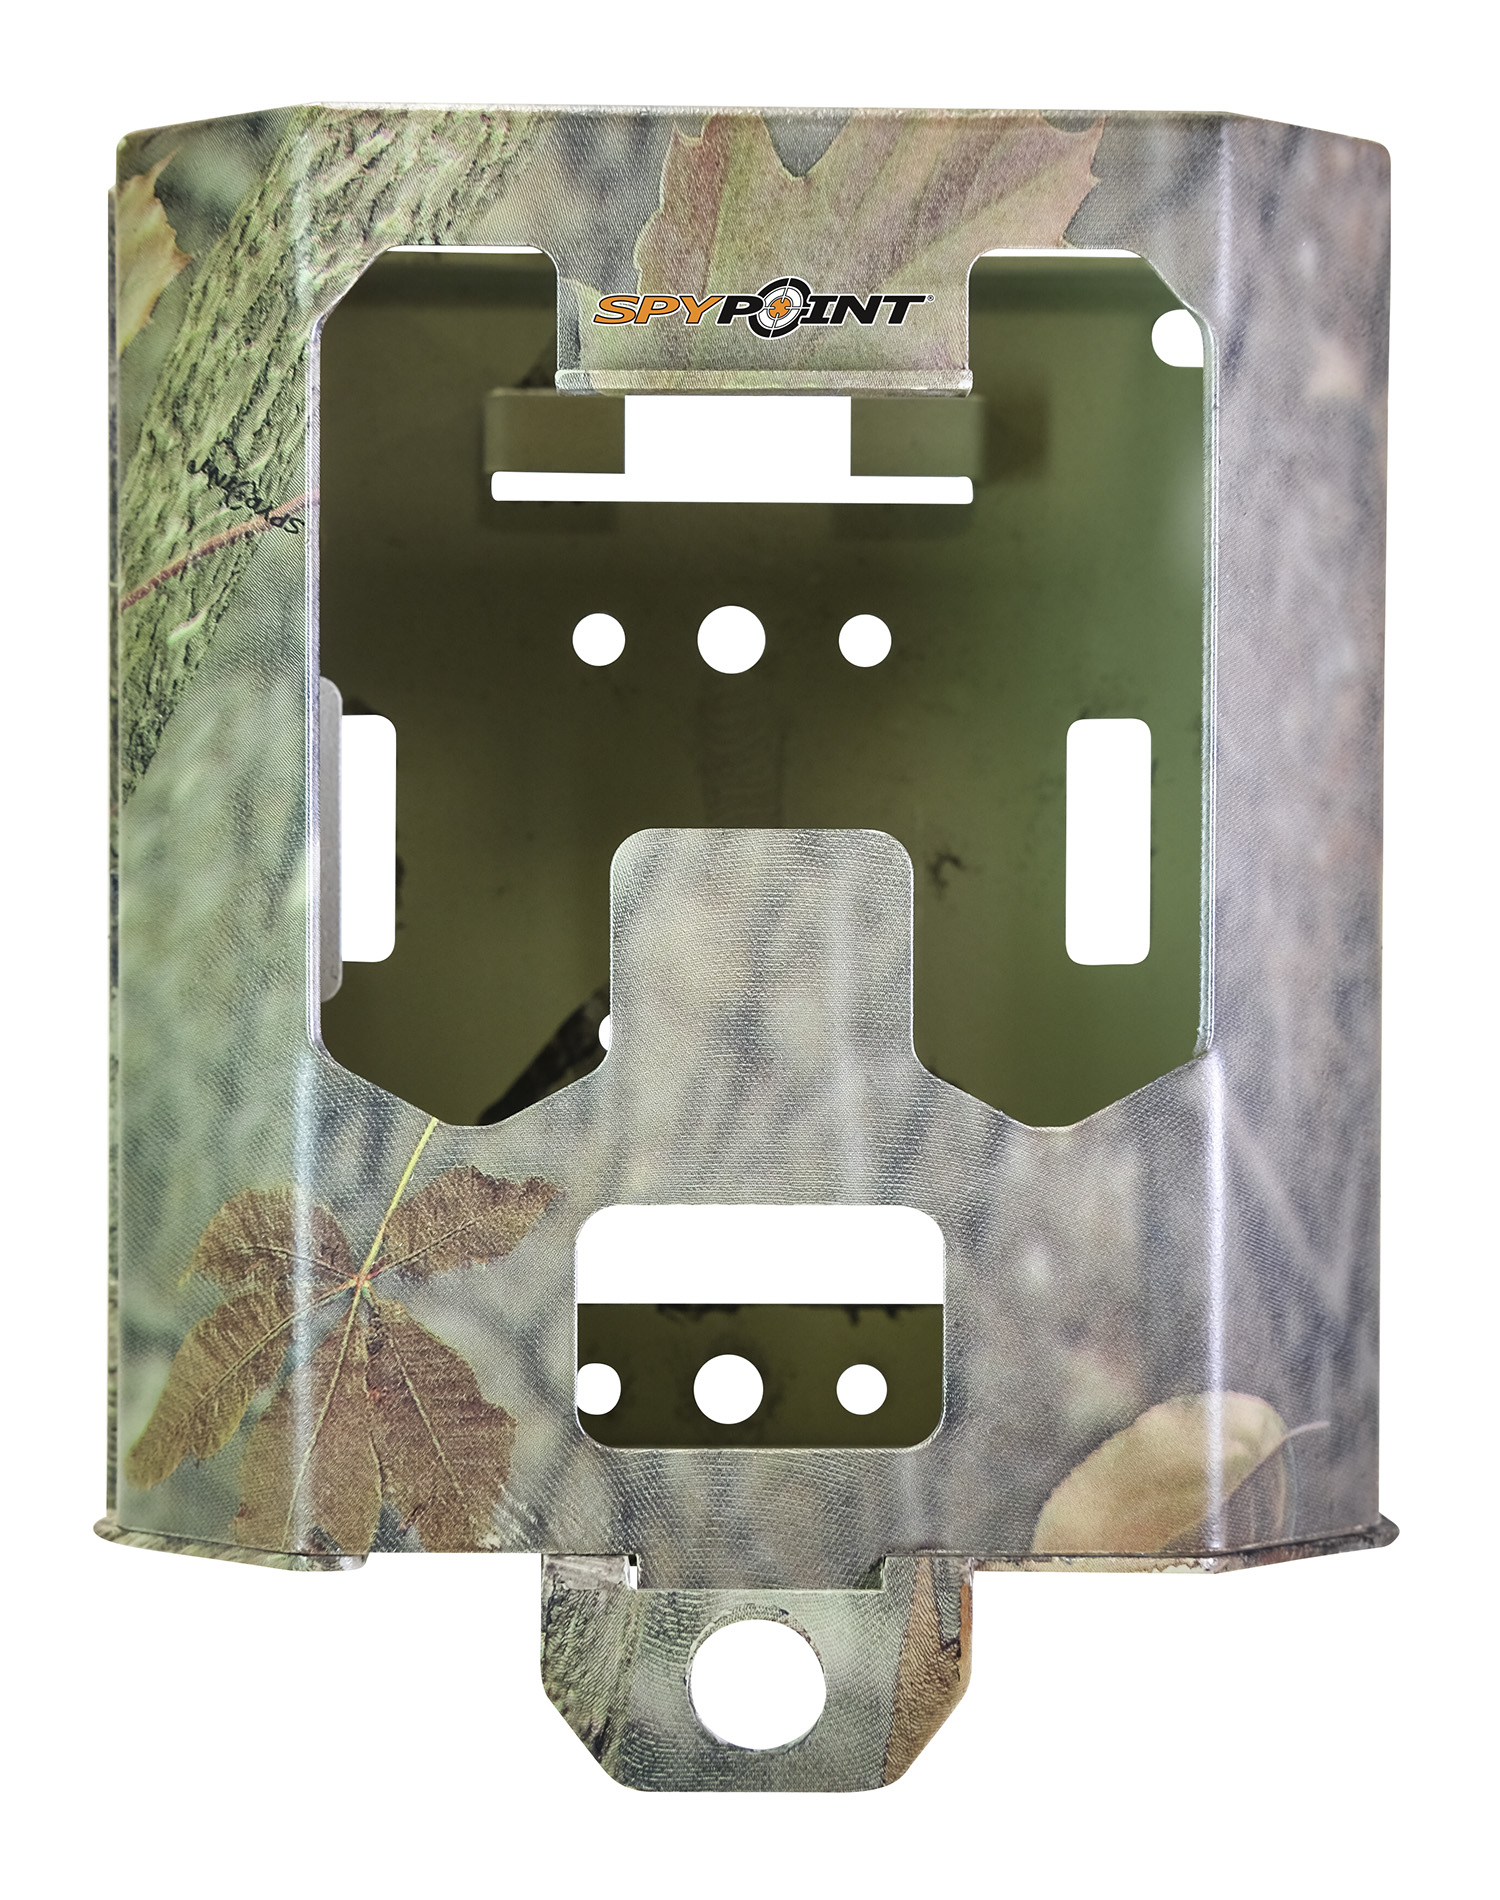 SPYPOINT TRAIL CAM STEEL CAMO SECURITY BOX FOR 42LED CAMERA!